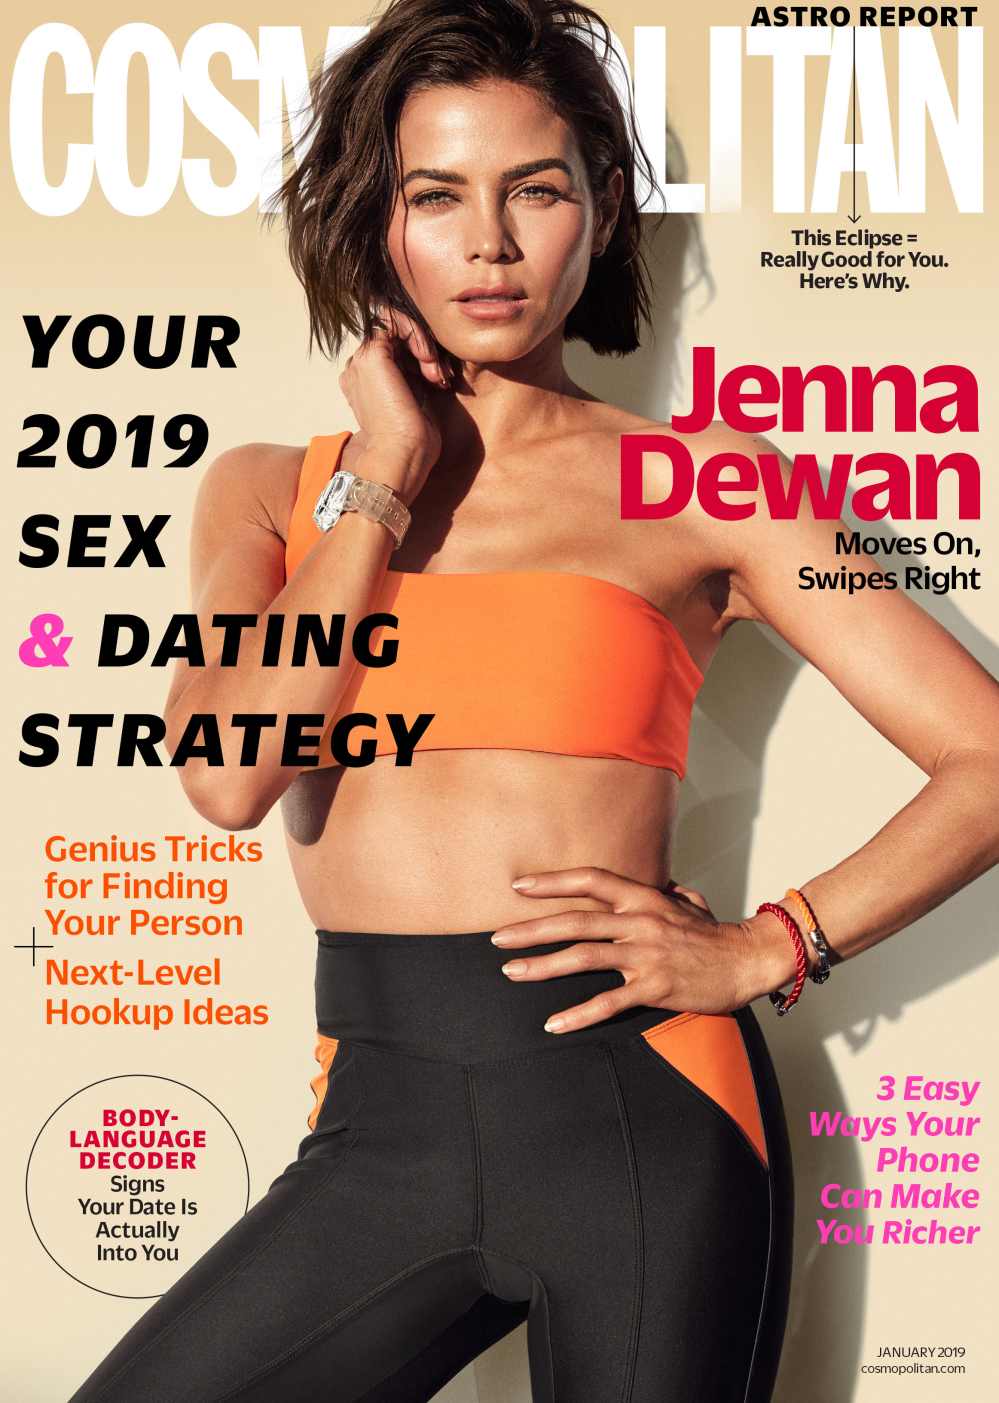 Jenna Dewan covering Cosmo for Wellness